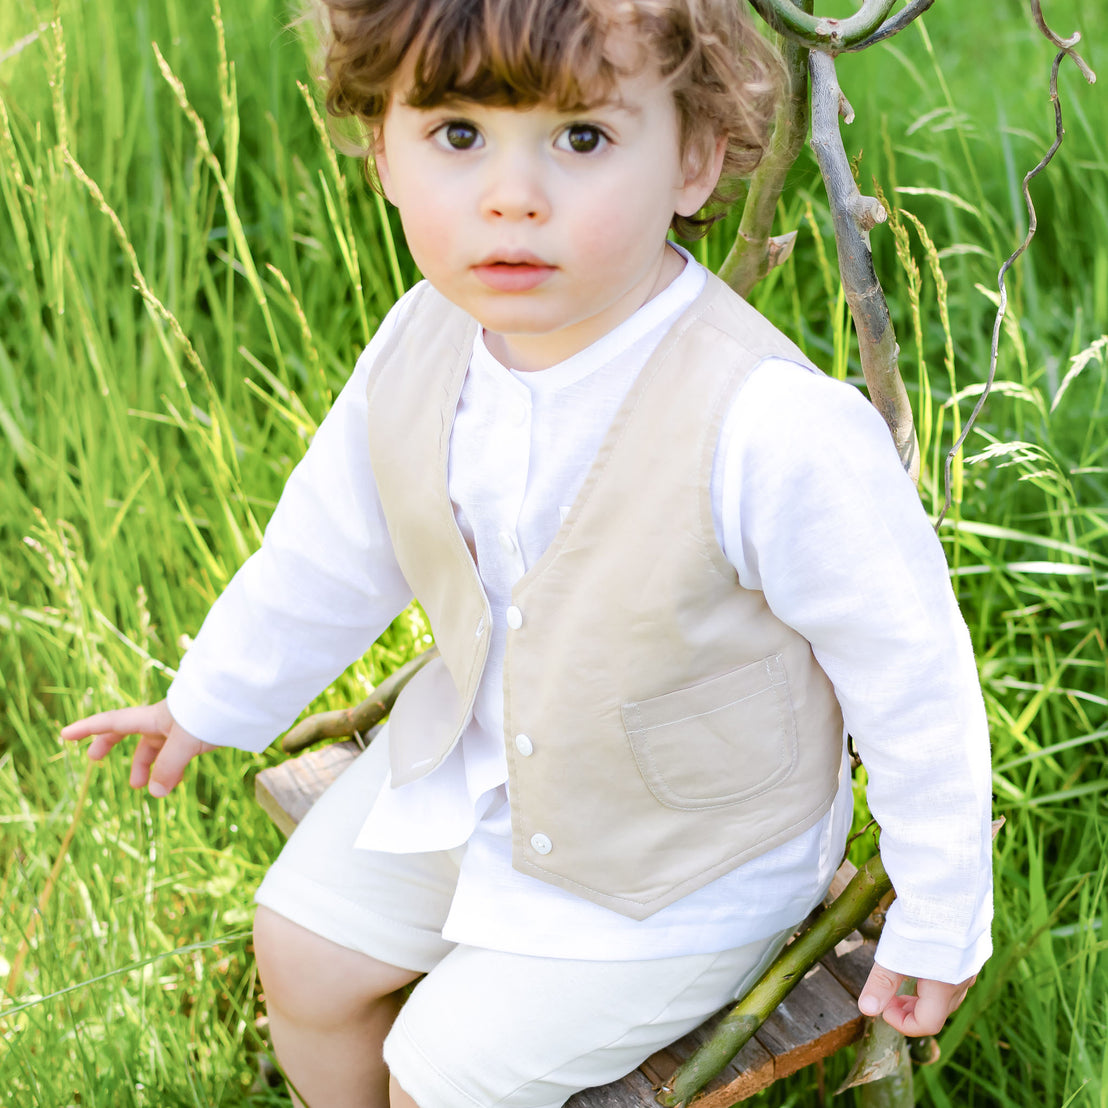 Photo of a baby boy sitting on a wooden chair outside in the forest. He is wearing the Silas Vest Suit that includes the vest, shorts, and onesie